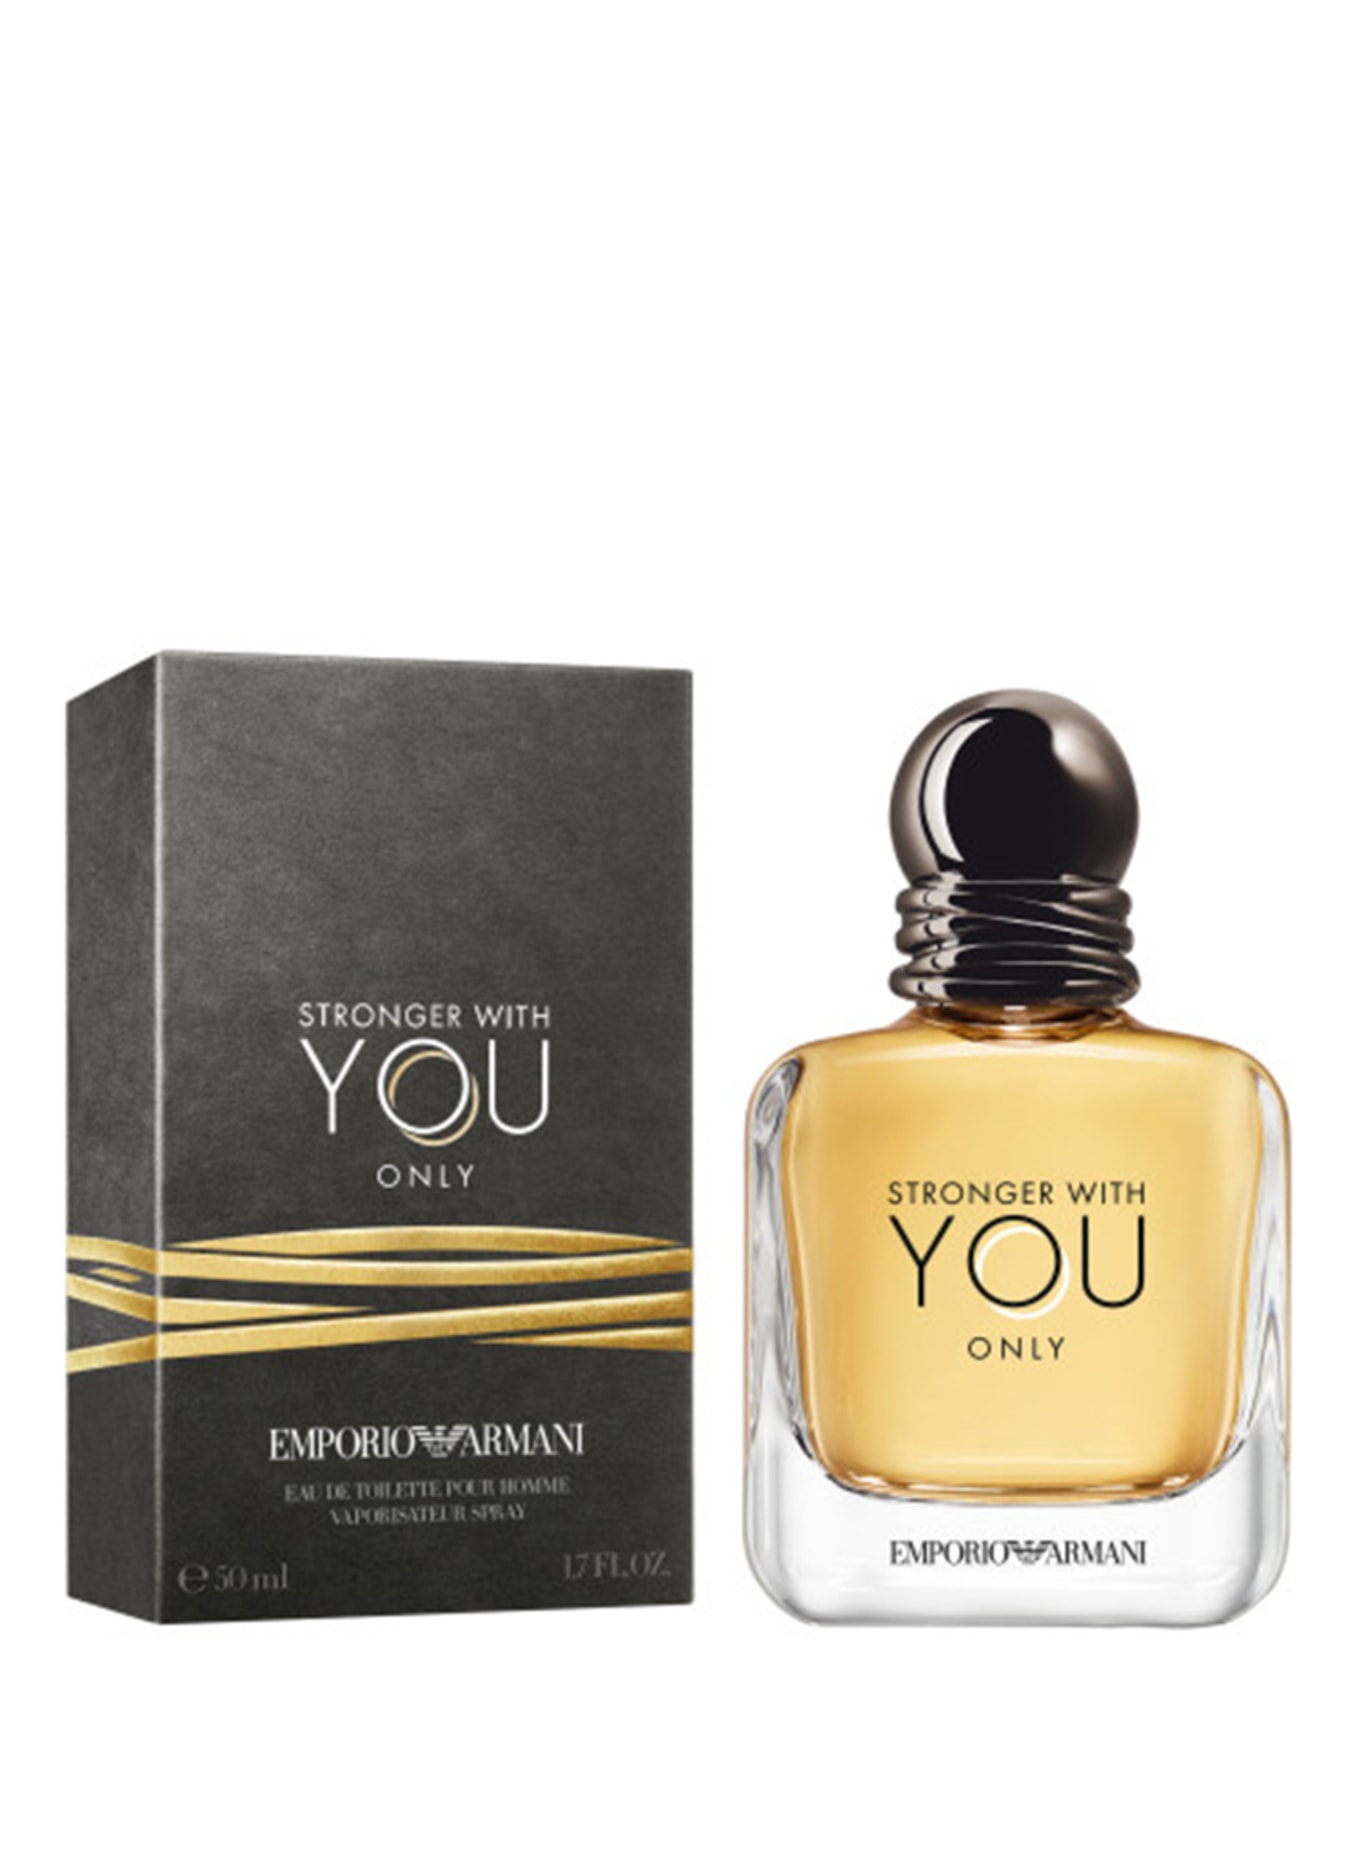 EMPORIO ARMANI STRONGER WITH YOU ONLY (Obrázek 2)